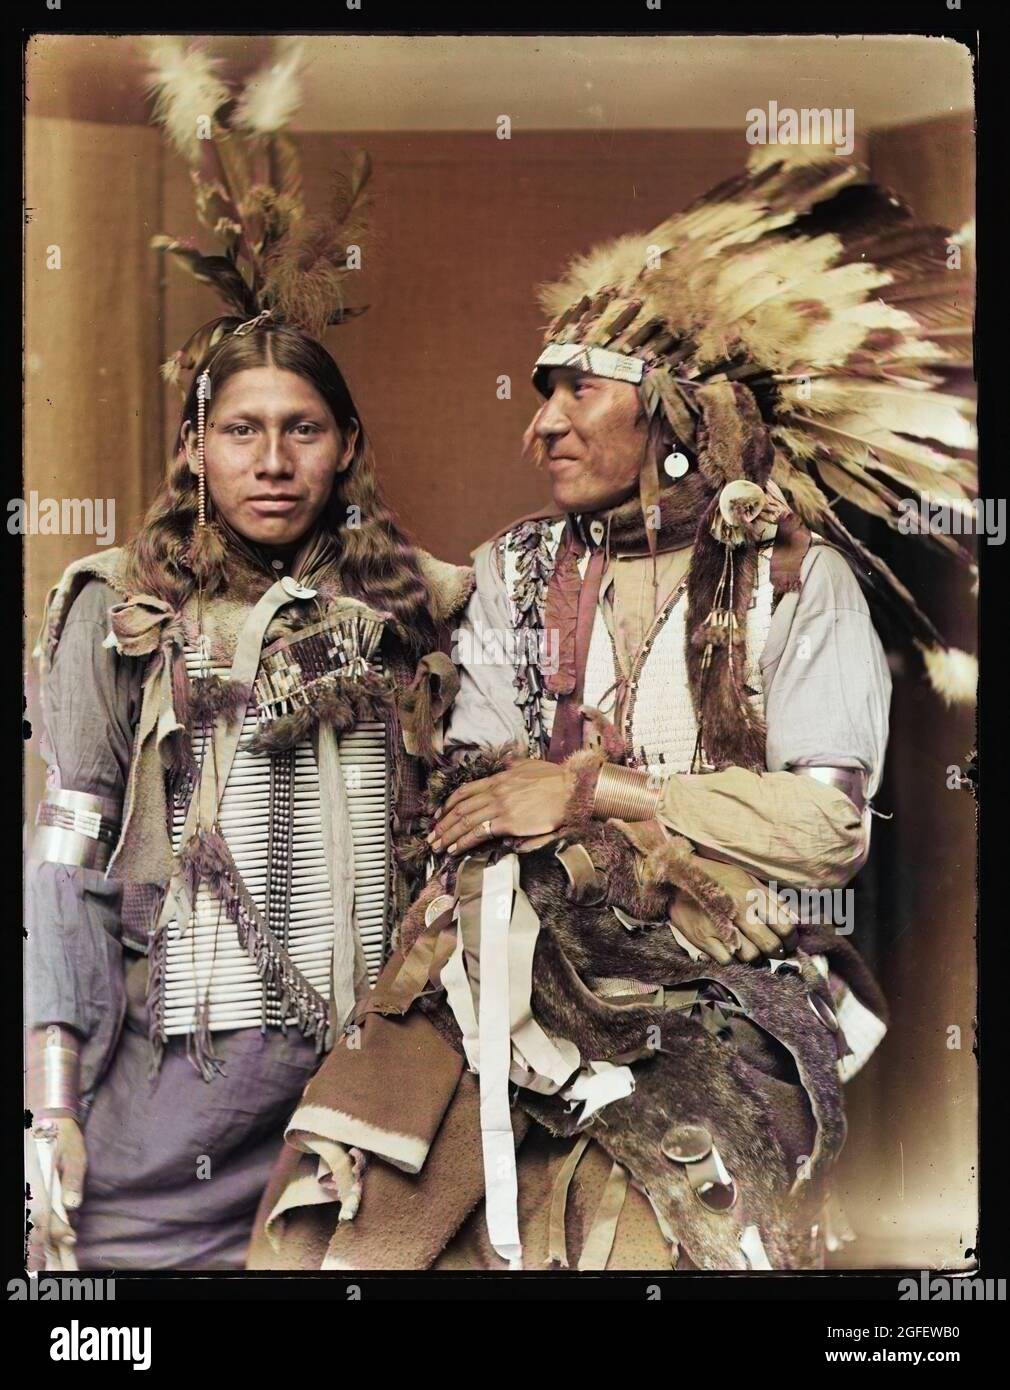 Holy Fro- left and Big Turnips, native americans / American Indians. probably members of Buffalo Bill's Wild West Show. C 1900. Colorized photo. Stock Photo